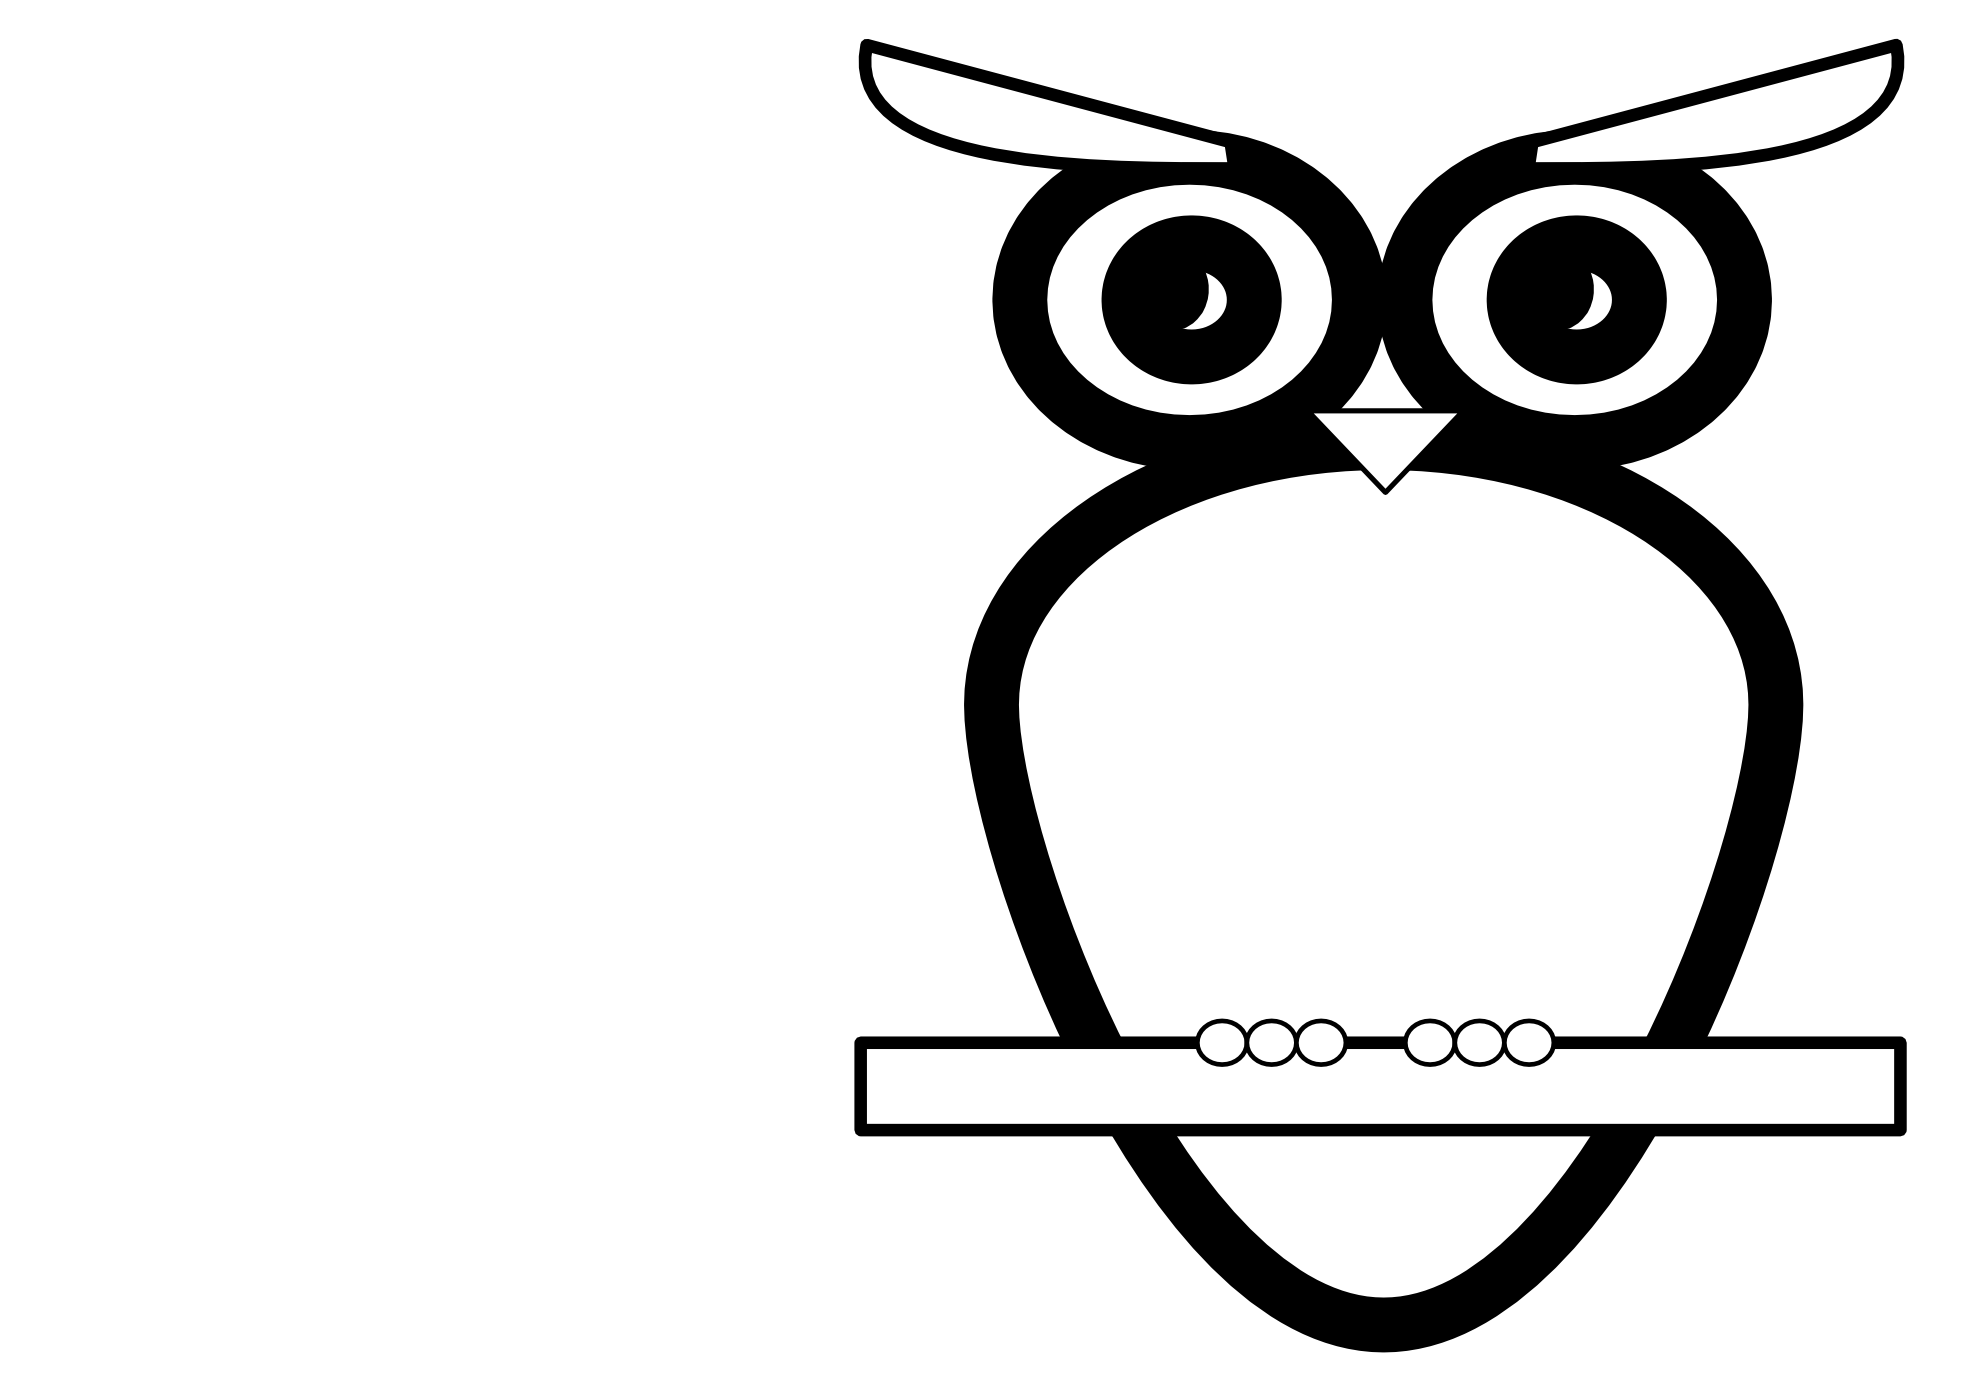 owl clipart black and white - photo #37